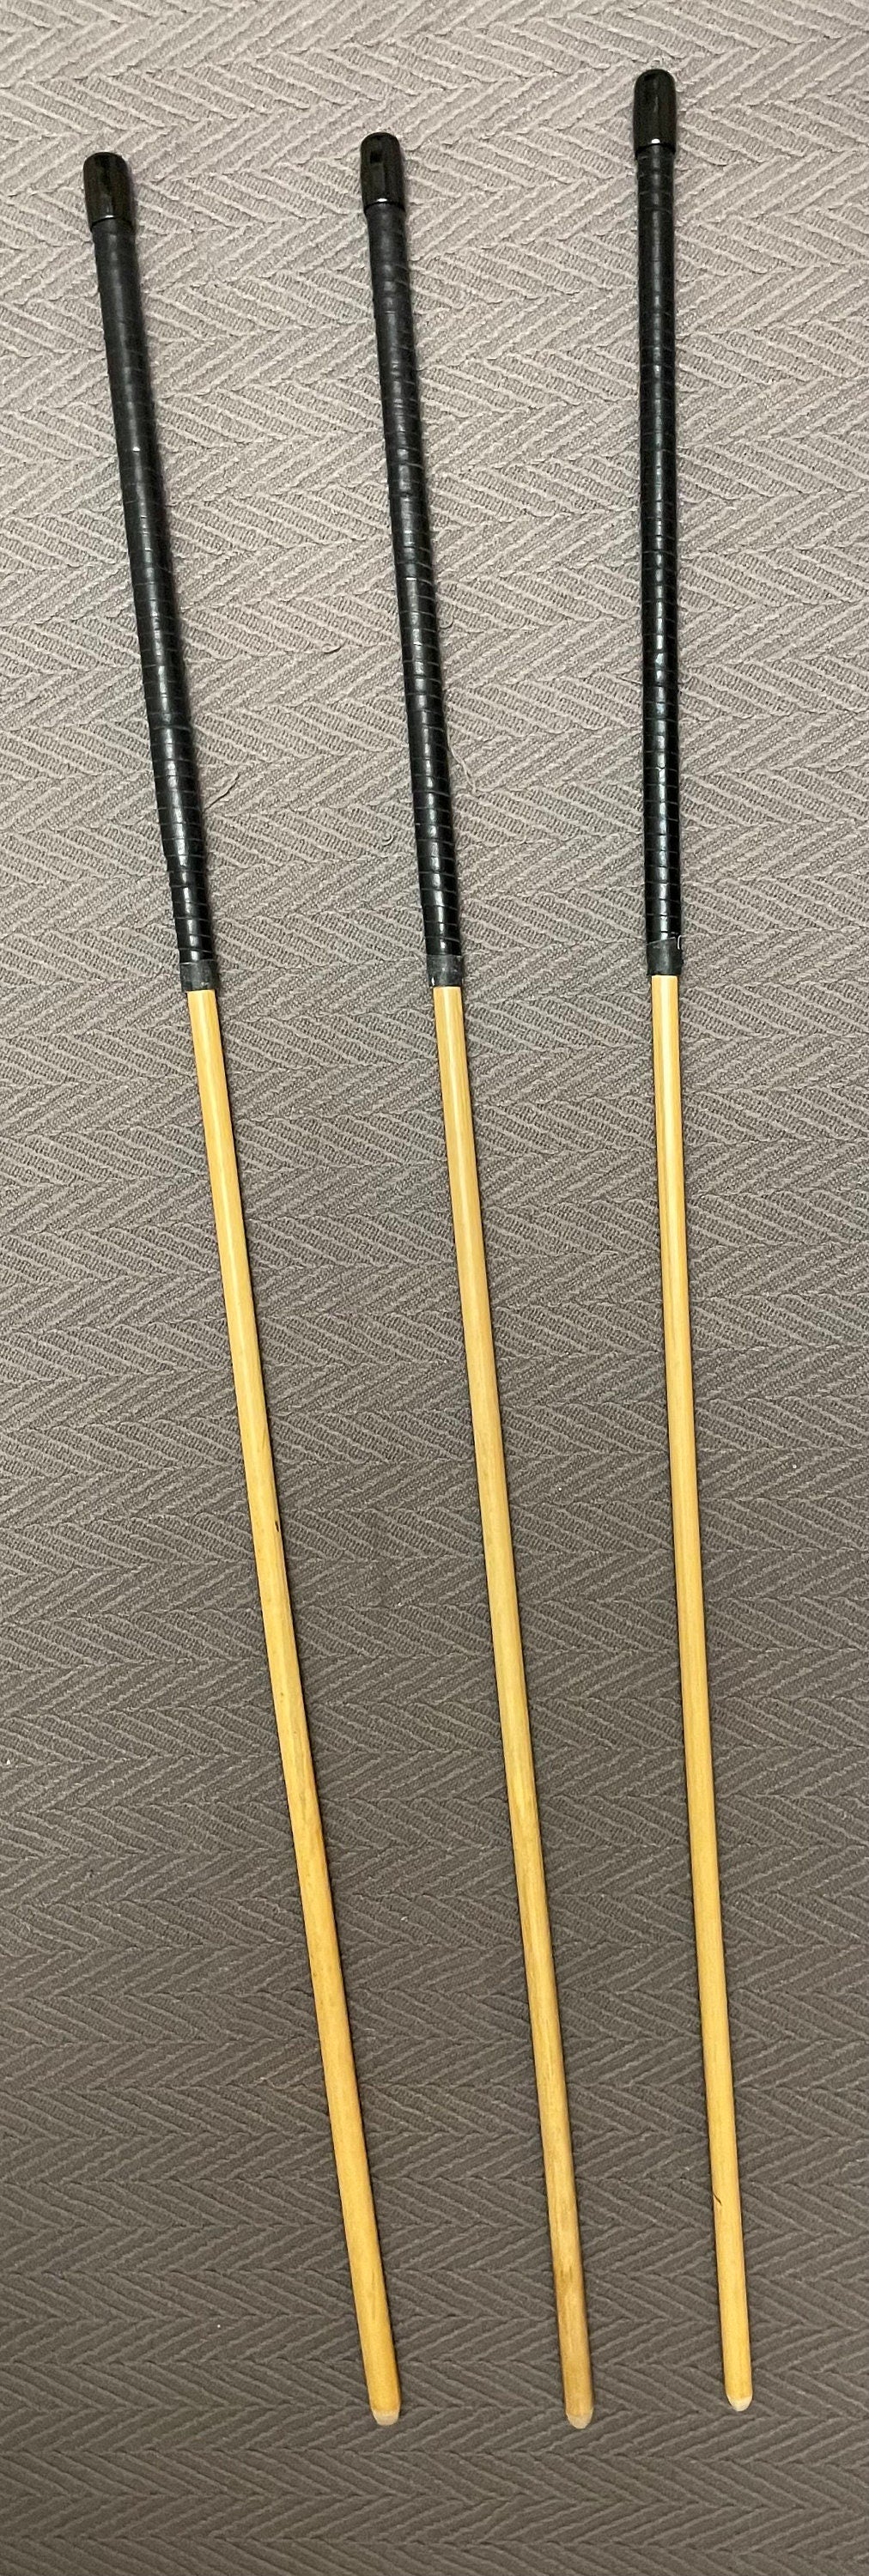 Set of 3 Knotless Dragon Canes / Ultimate Rattan Canes / No Knot Canes with Black Kangaroo Leather Handles